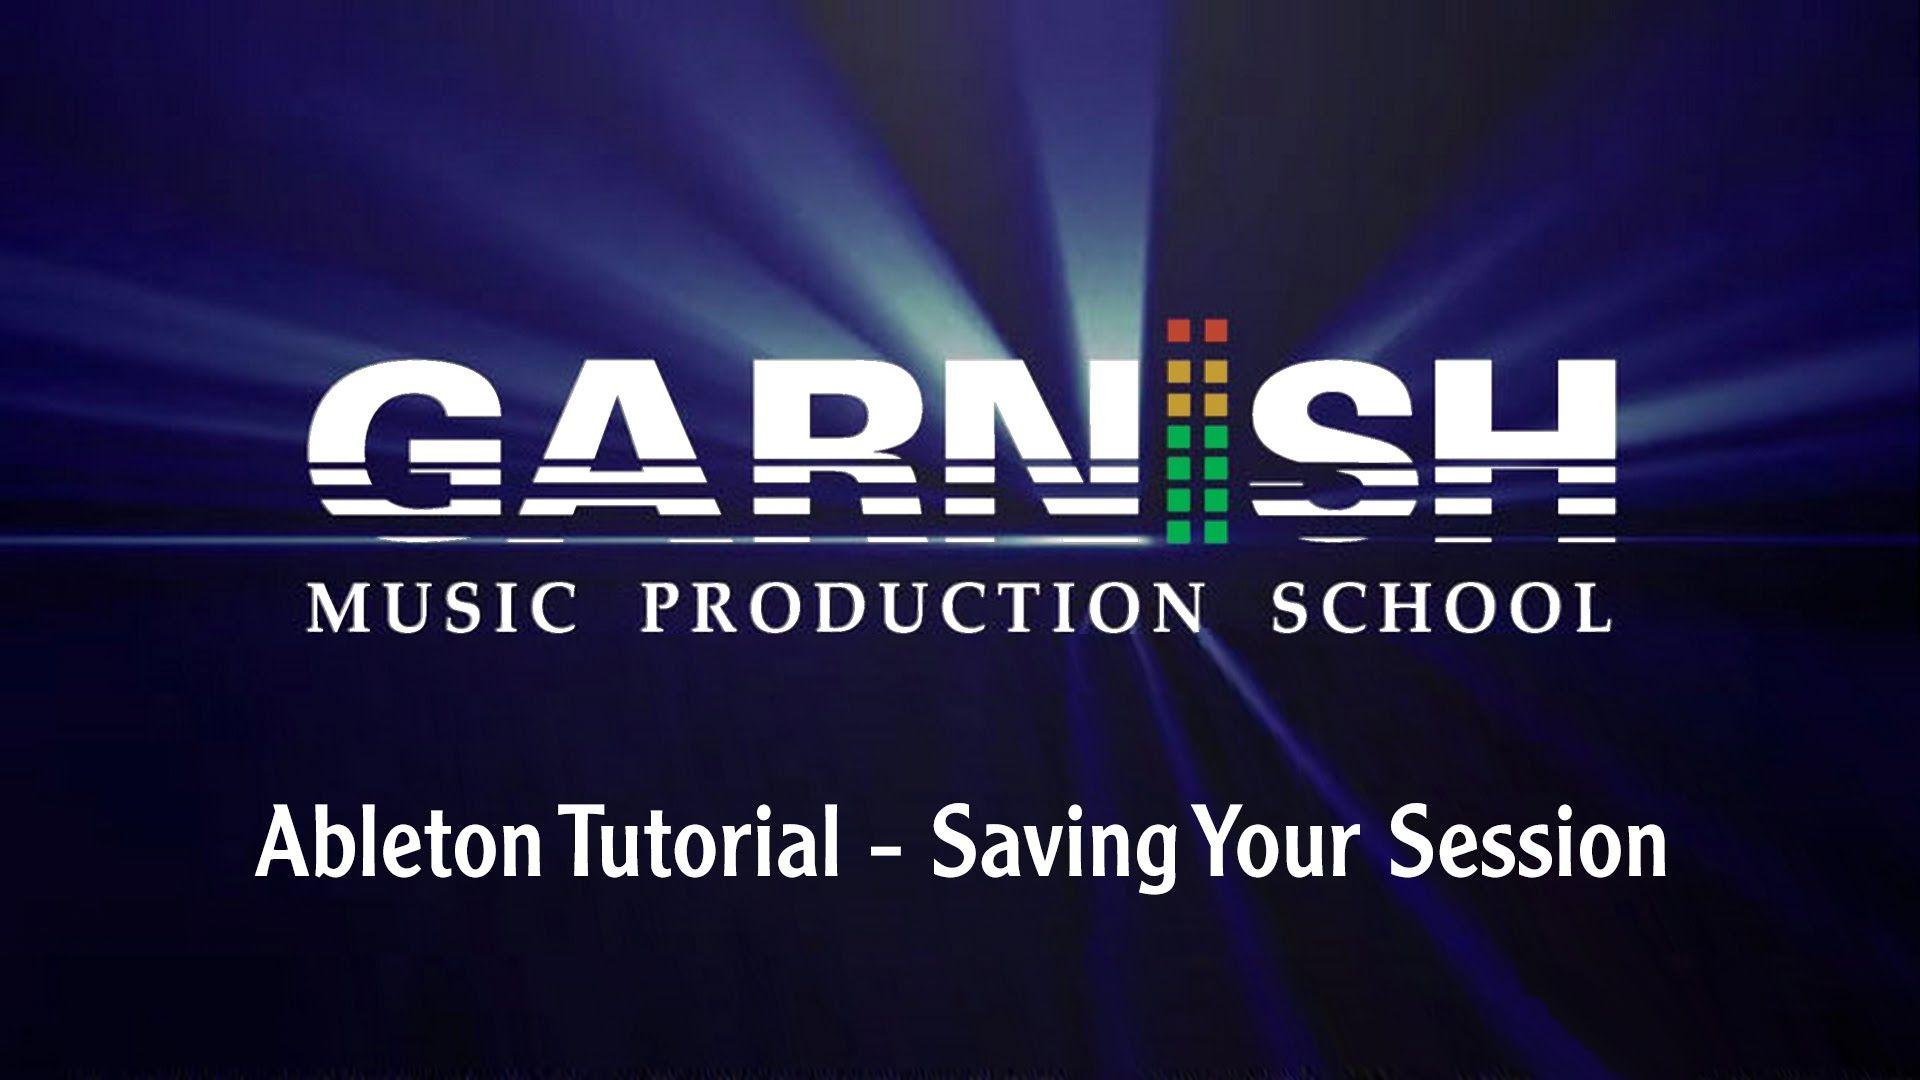 Ableton Tutorial Your Session